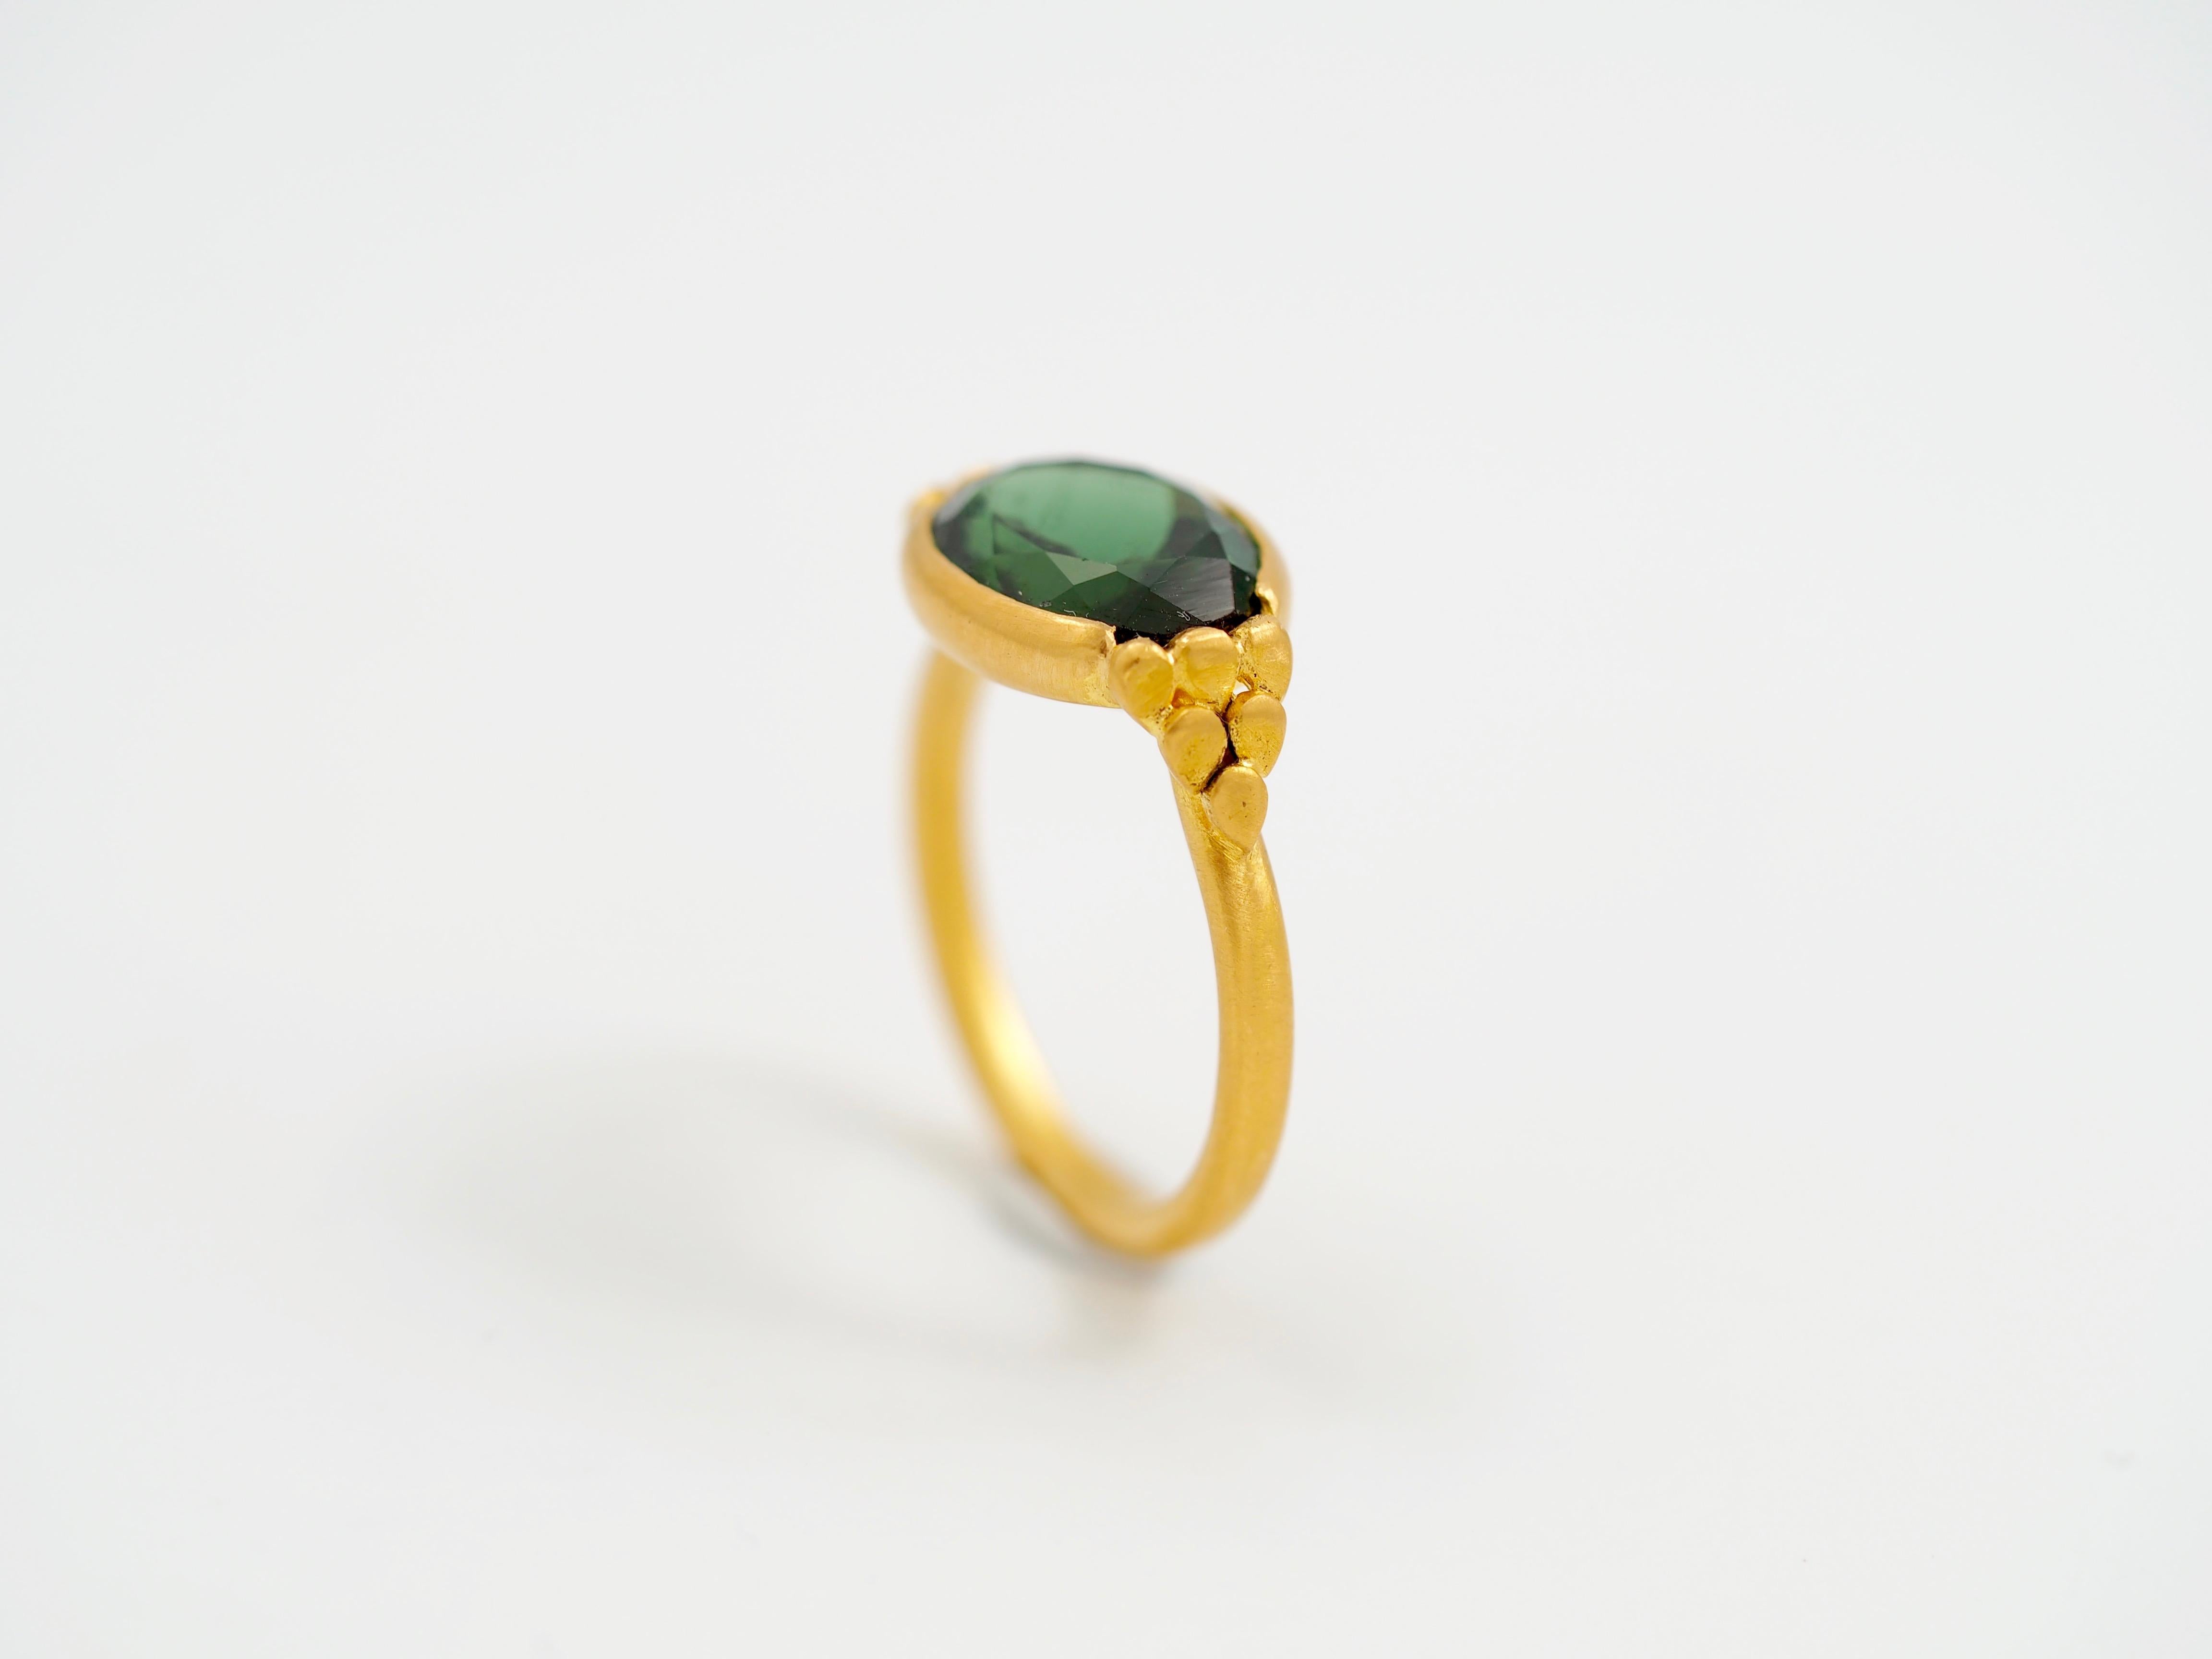 This delicate ring by Scrives is composed of a deep green tourmaline (forest green) of 4.36cts. The tourmaline is slightly showing 2 different greens. On both sides, the green is turning toward green yellowish. Whereas at the center, the green is